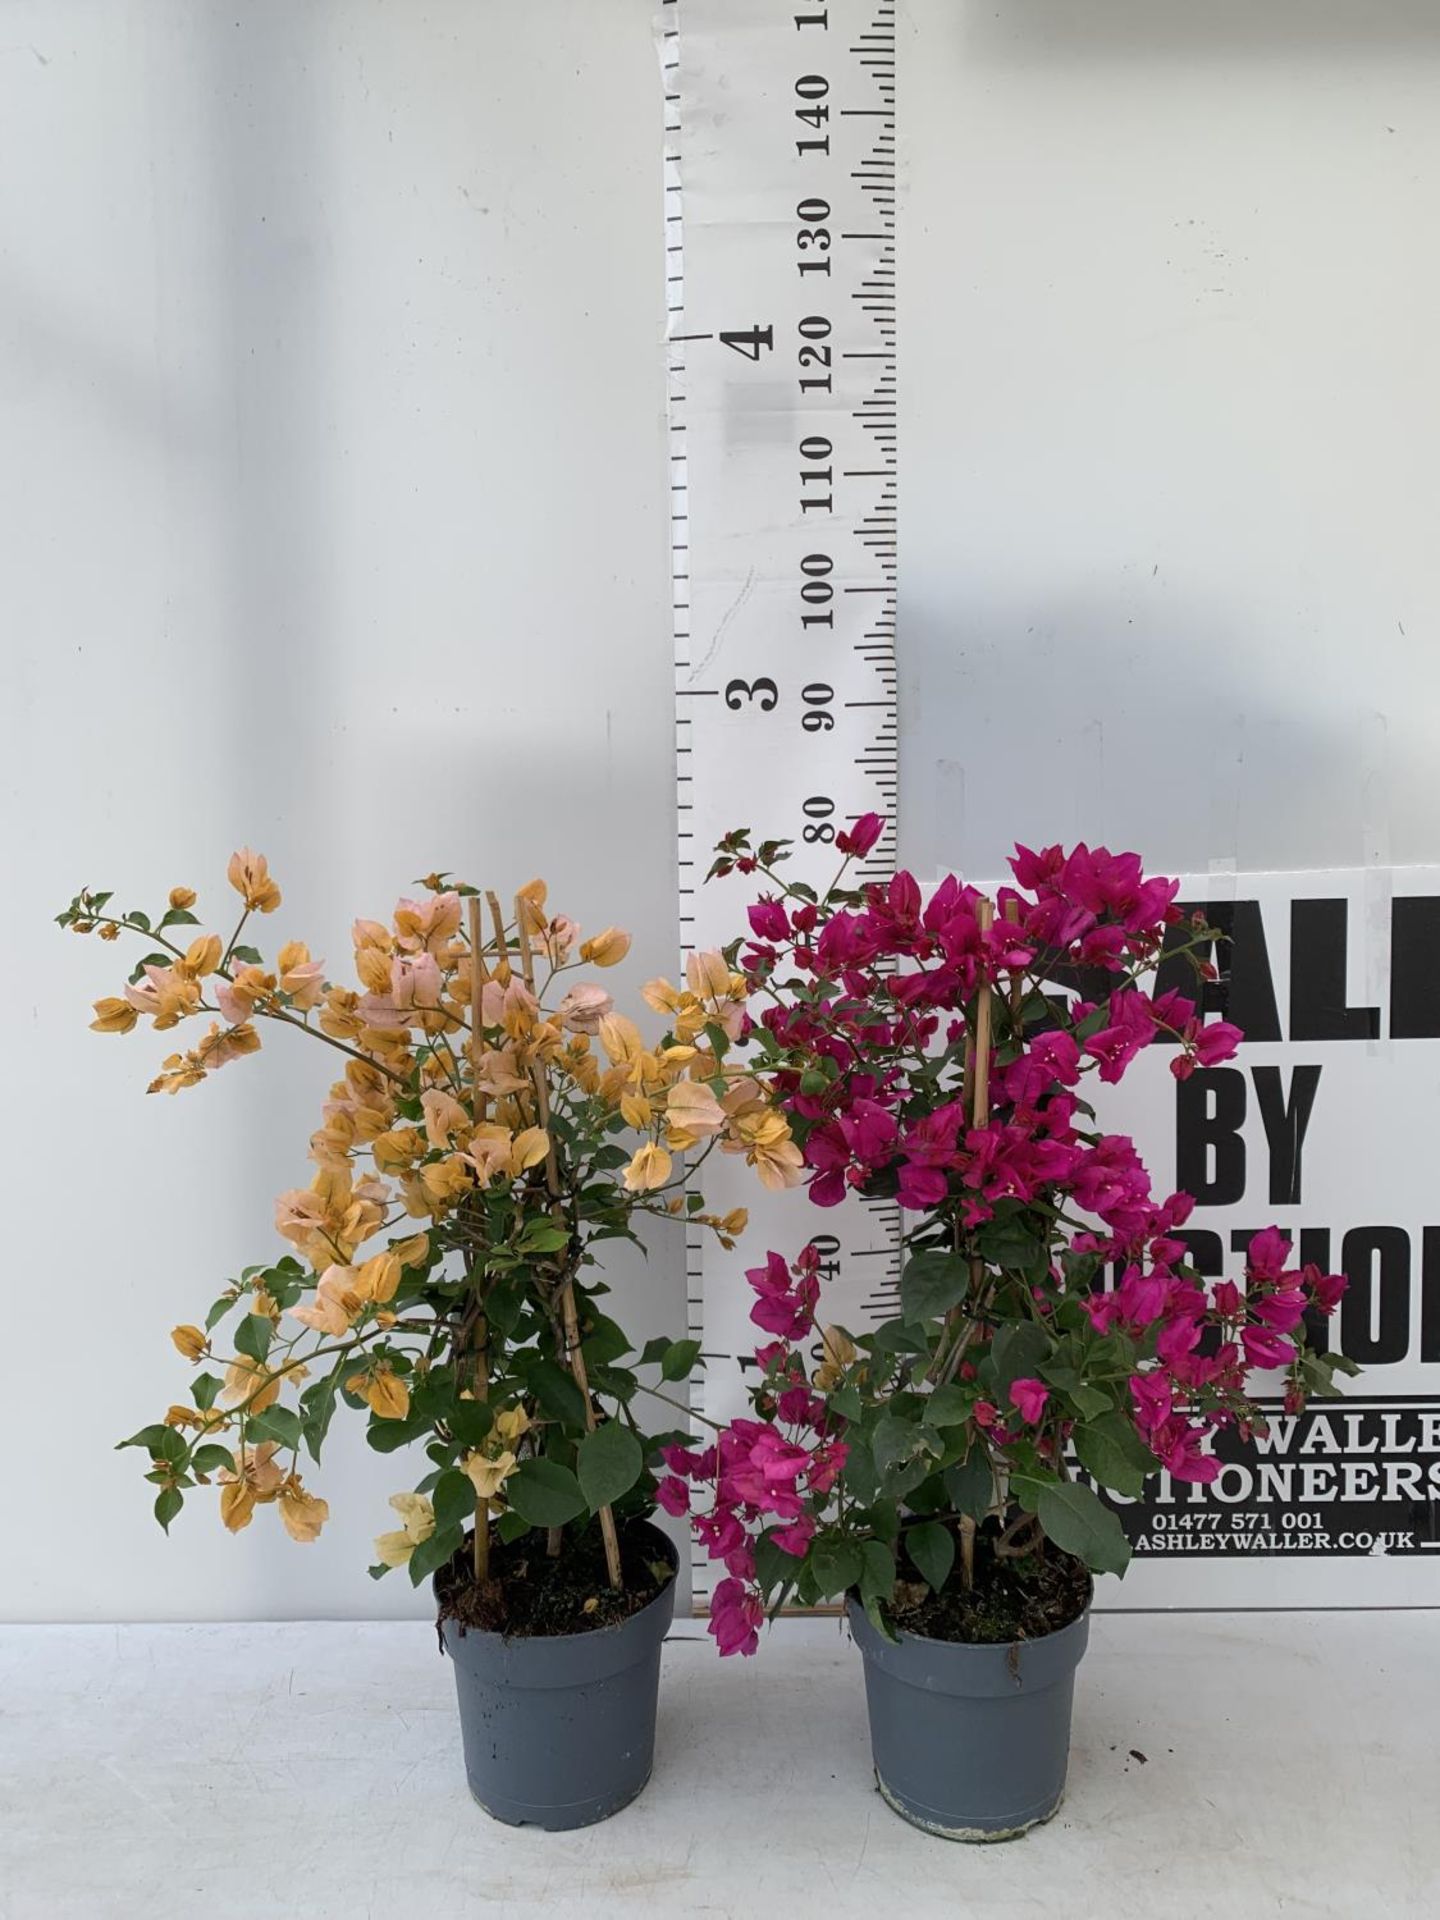 TWO BOUGAINVILLEA SANDERINA ON A PYRAMID FRAME ONE ORGANGE ONE PINK IN 3 LTR POTS HEIGHT 70-80CM.